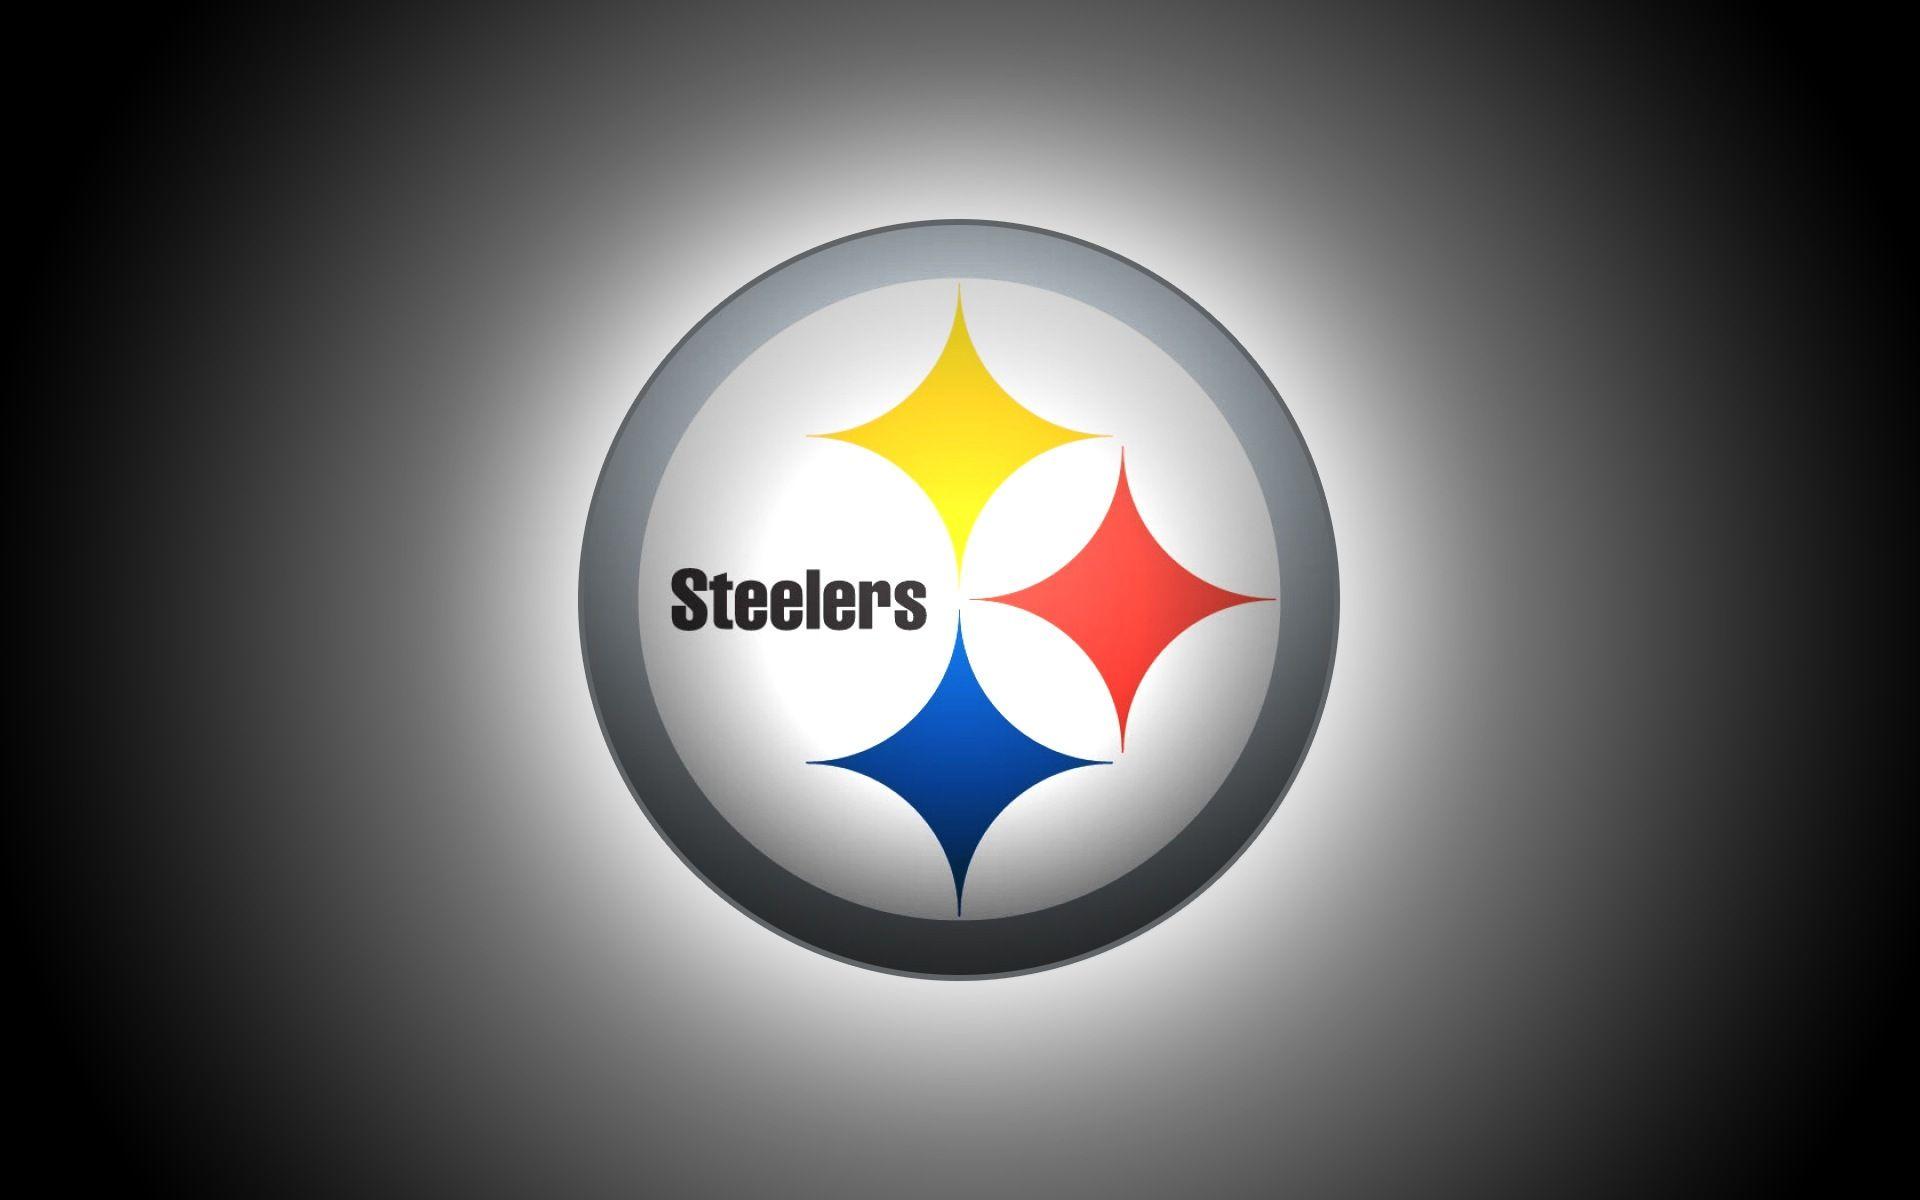 IRBOB SEVENFOLD: All Steelers Wallpapers